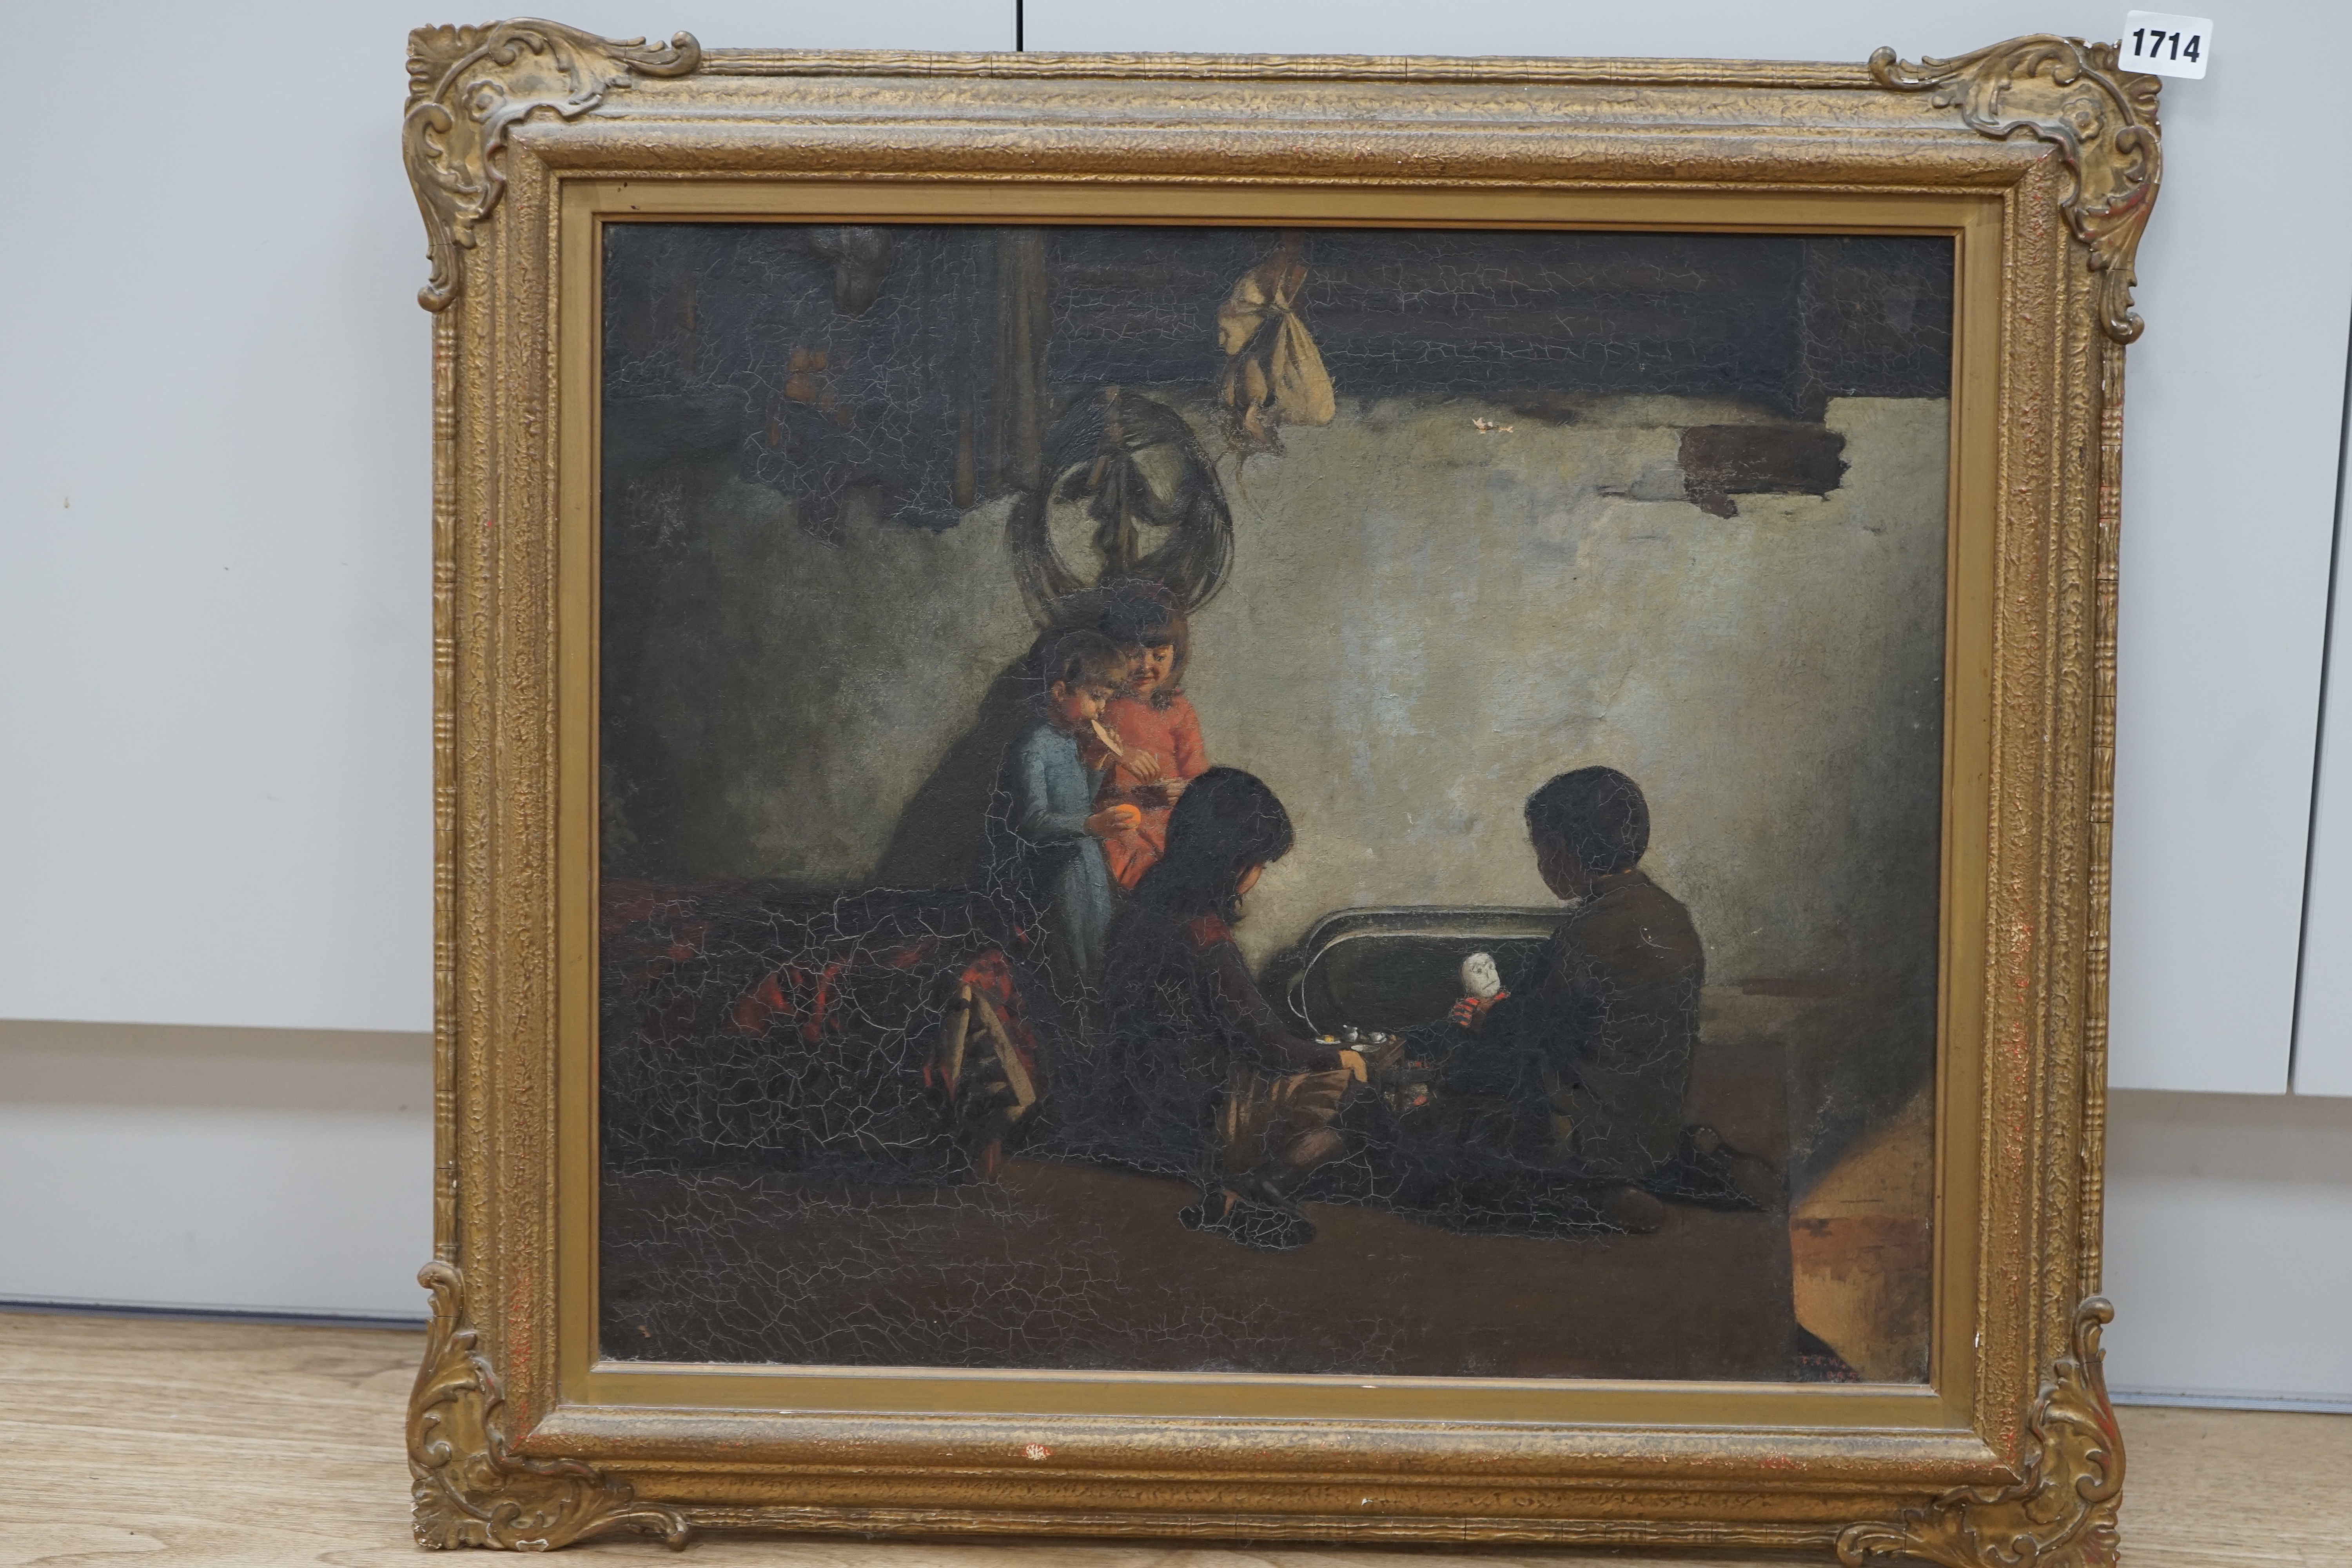 F.J.W., 19th century School, oil on canvas, Four children in an interior, initialled and dated 1885, 42 x 49cm. Condition - poor, dirt and craquelure all over